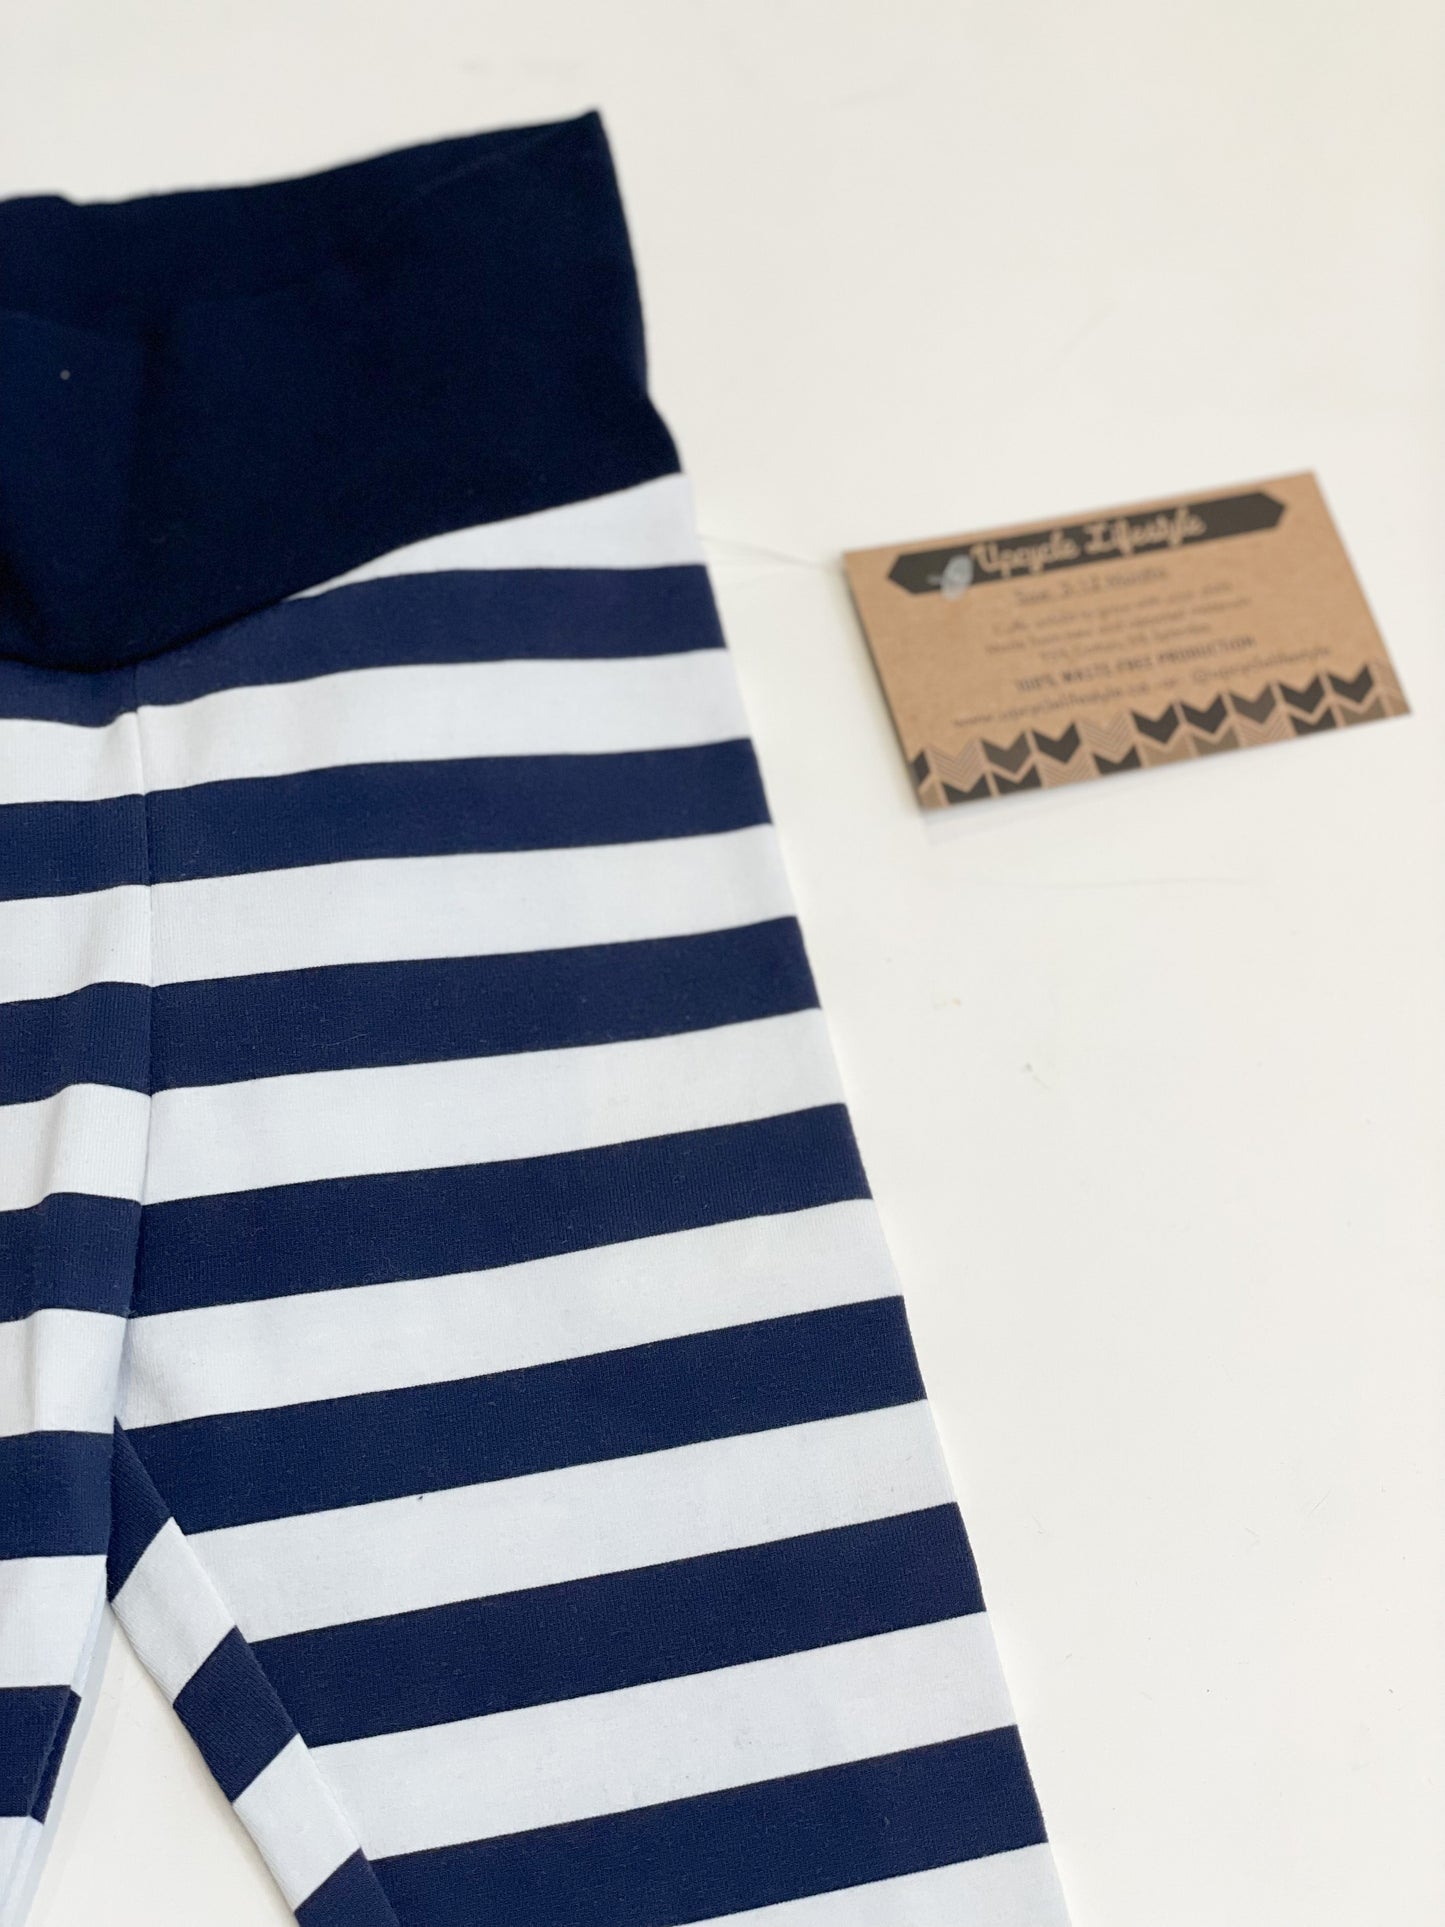 Navy Stripe Grow-With-Me Baby Leggings - 3 to 12 Months